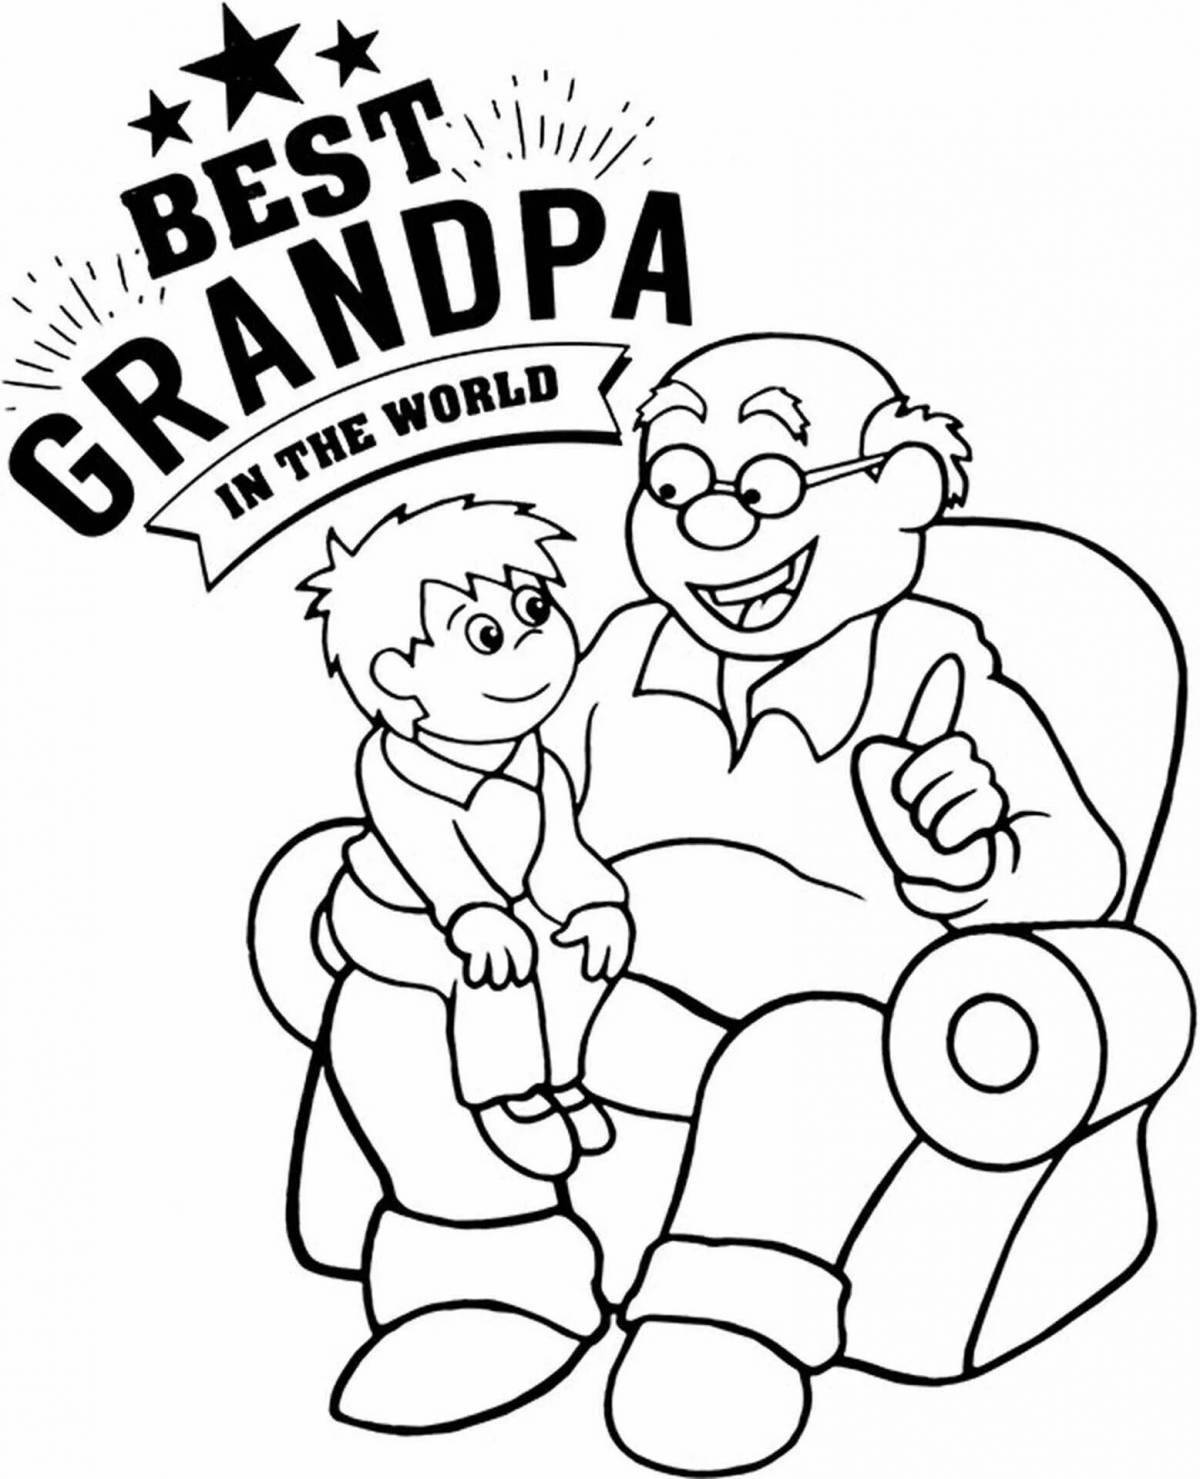 Colorful grandfather card coloring page